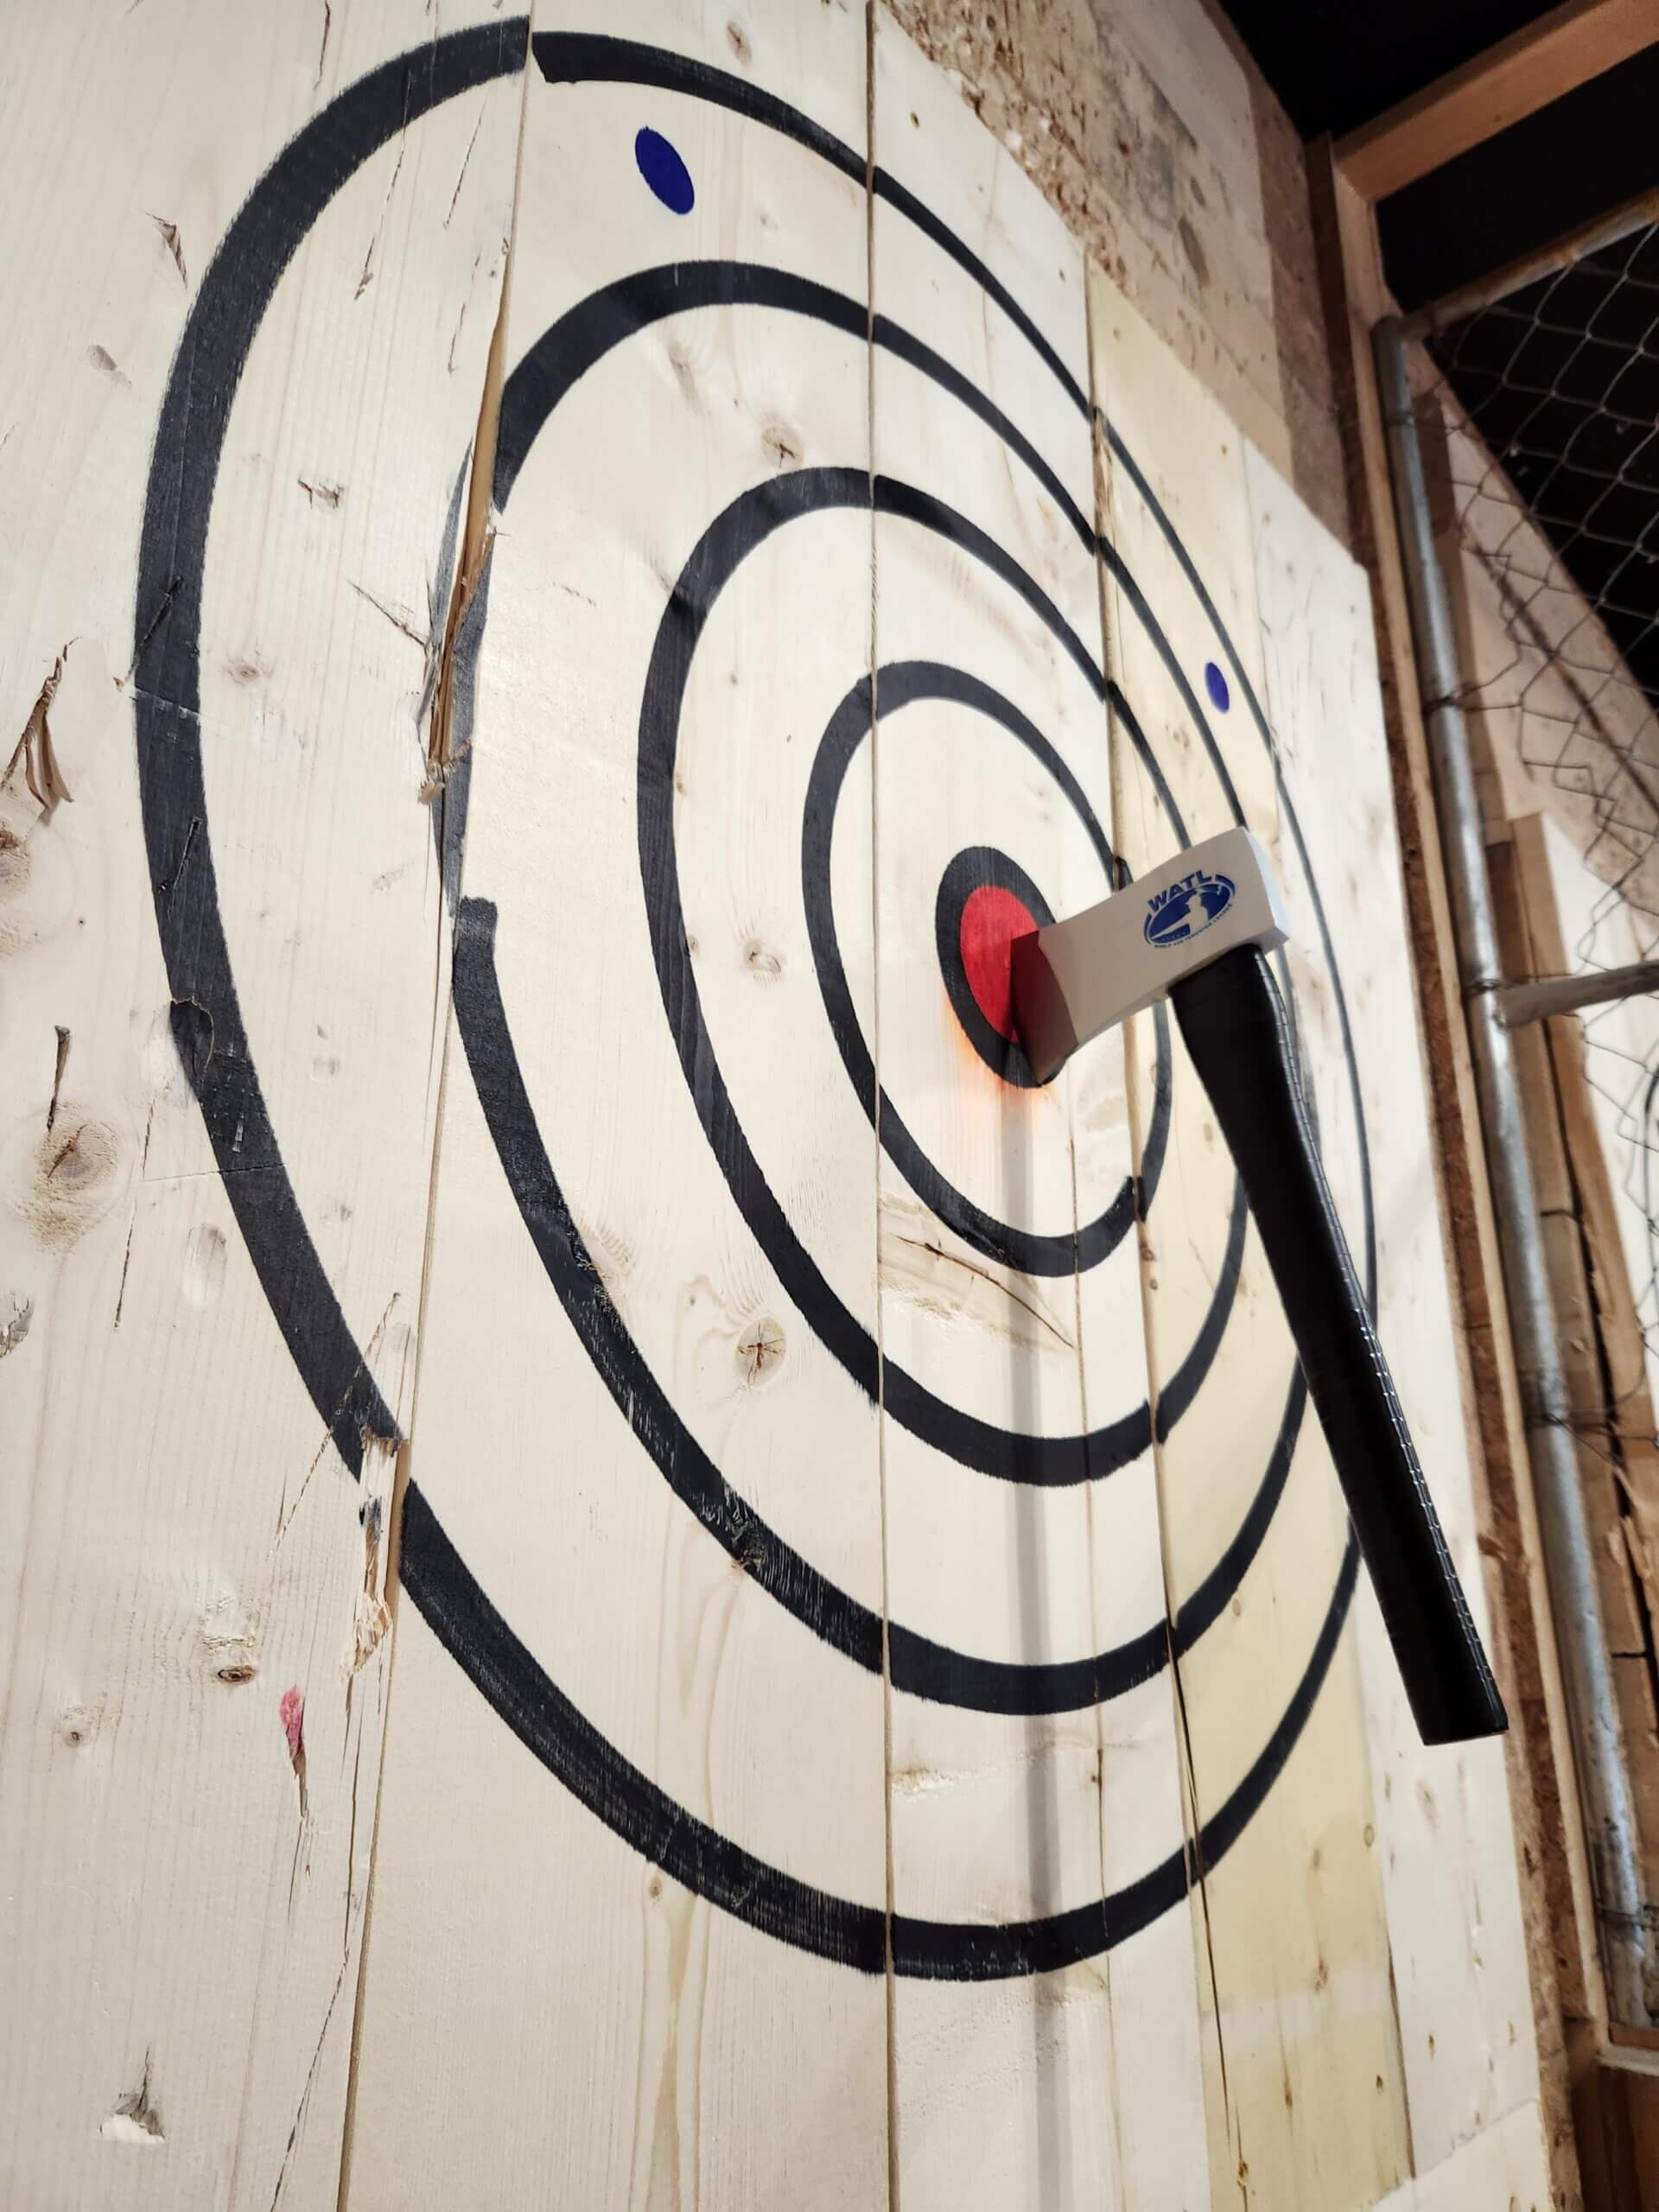 Image of an axe in the bullseye of the target at Deep Creek Axe Throwing Co.